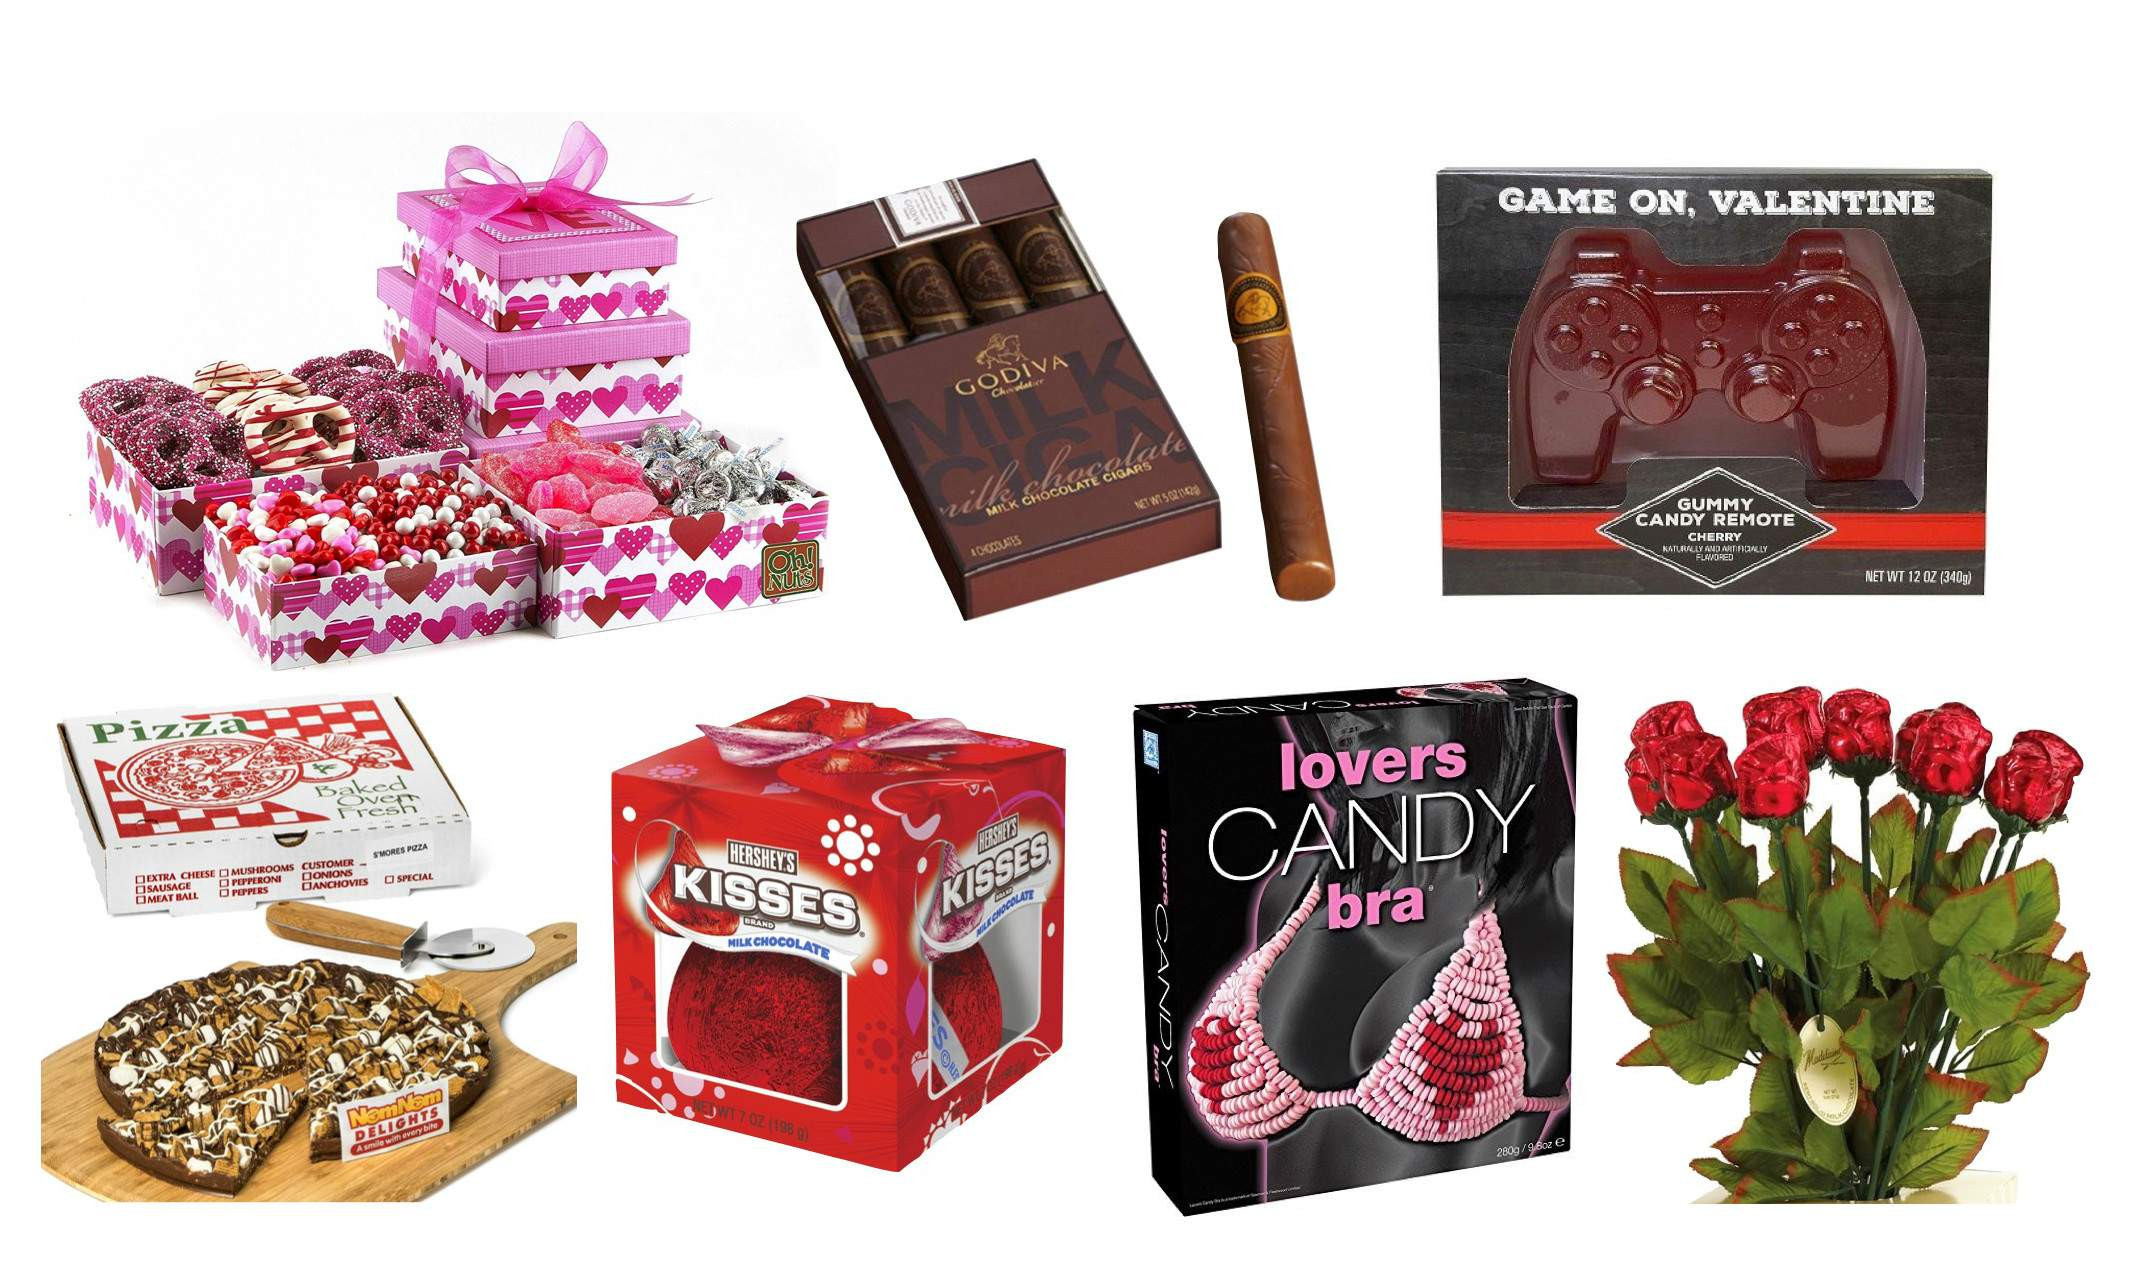 Valentine'S Day Gift Ideas For Girlfriend
 Traditional Gifts for Your Girlfriend But With A Twist